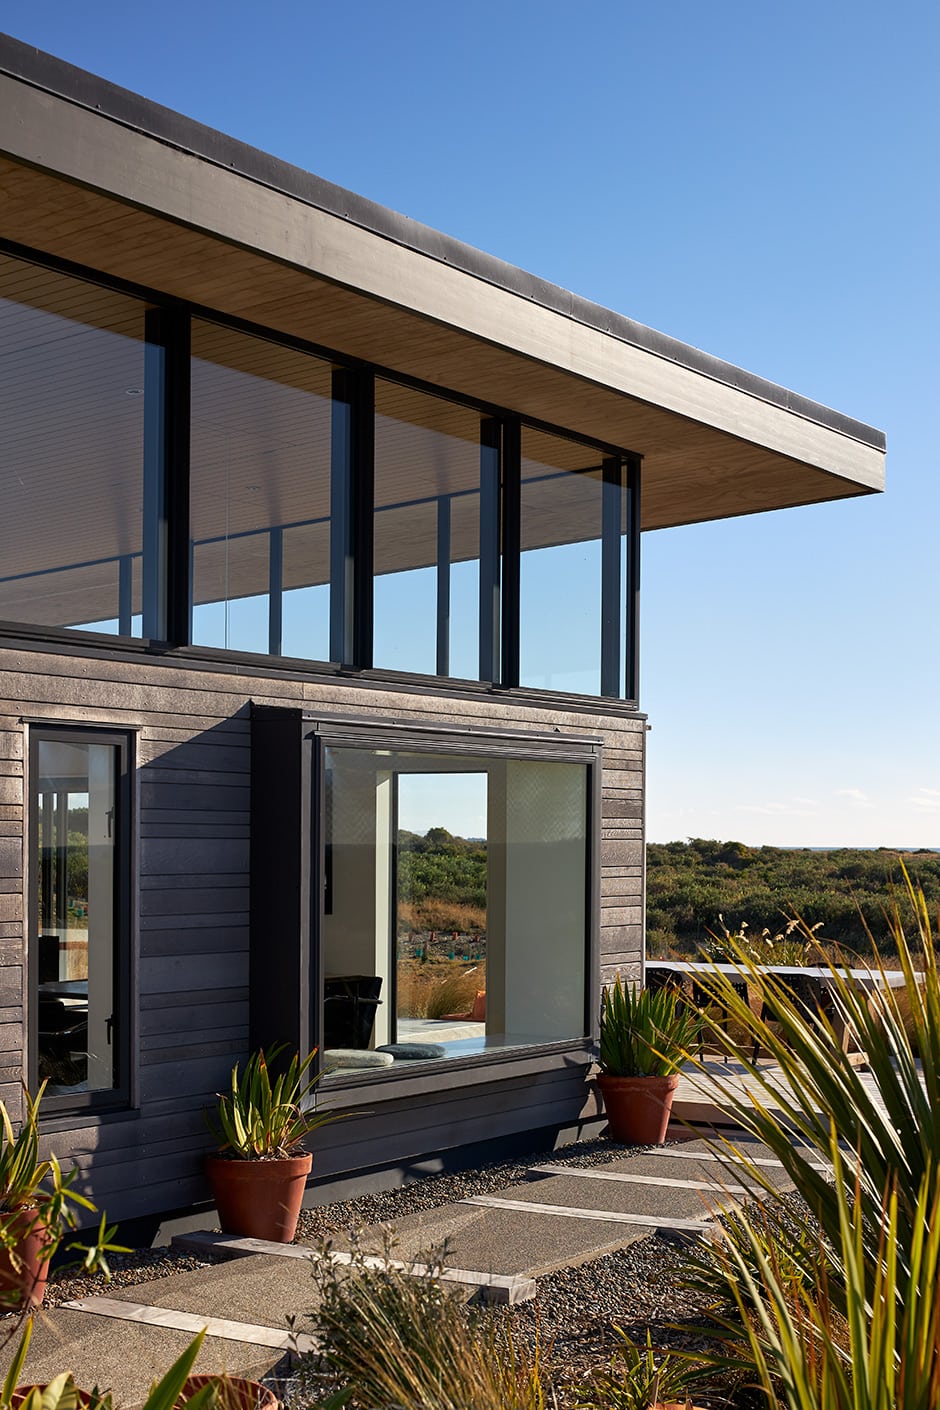 First Light Studio designs a home that embraces the extremes of the Kāpiti Coast